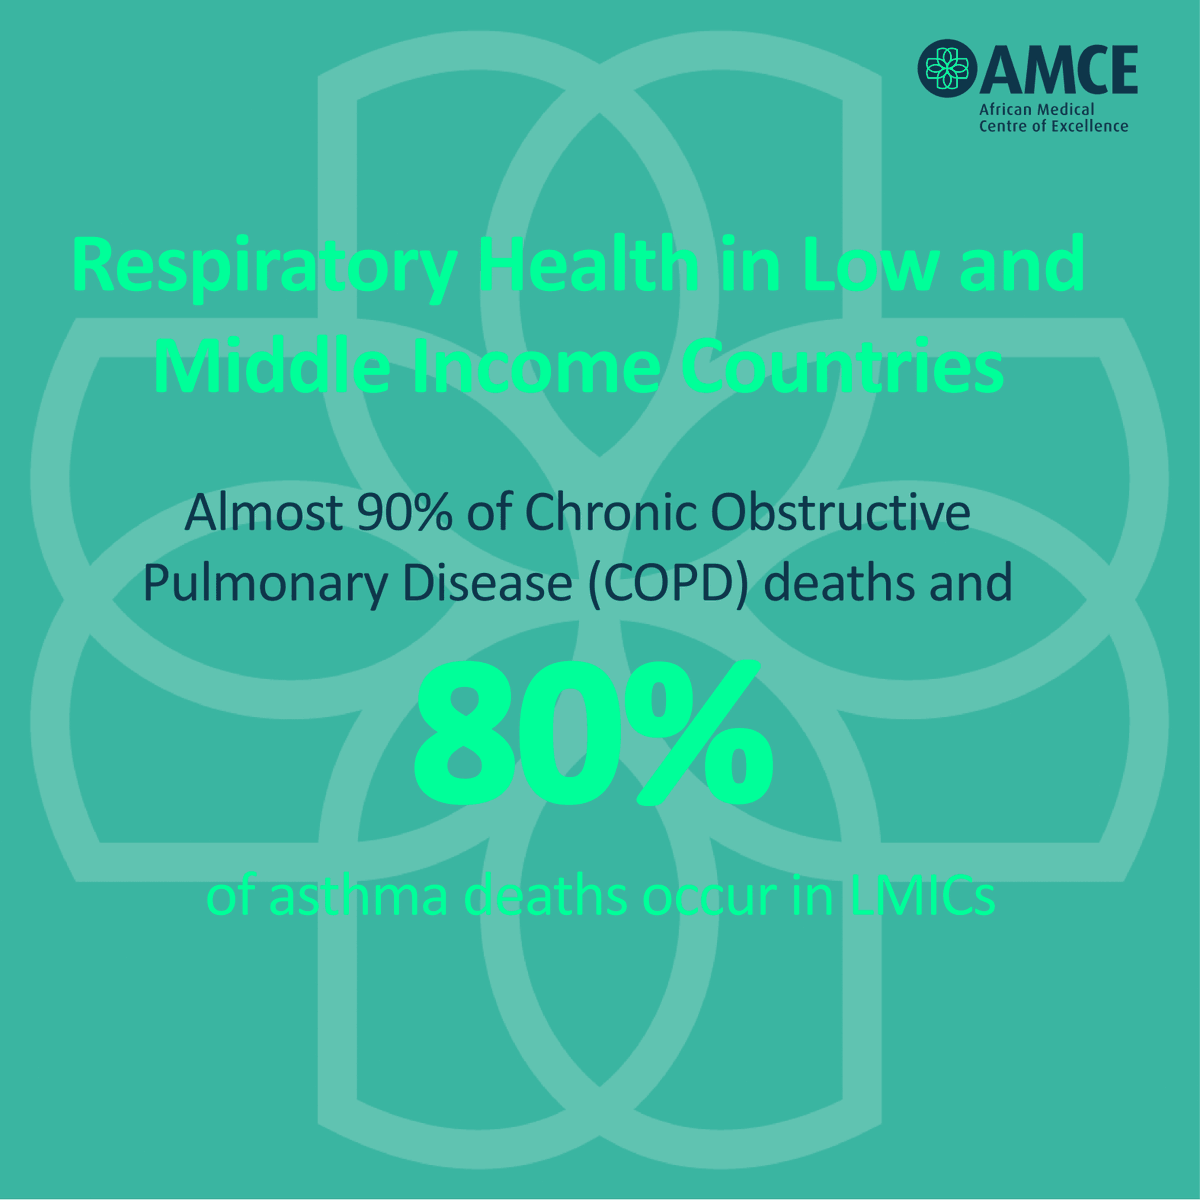 Did you know almost 90% of chronic respiratory disease deaths & 80% of asthma deaths occur in low- and middle-income countries? However, vital resources like spirometry & inhaled therapies are scarce. #AMCE aims to transform respiratory health. 

#CRD #RespiratoryHealth #AMCE